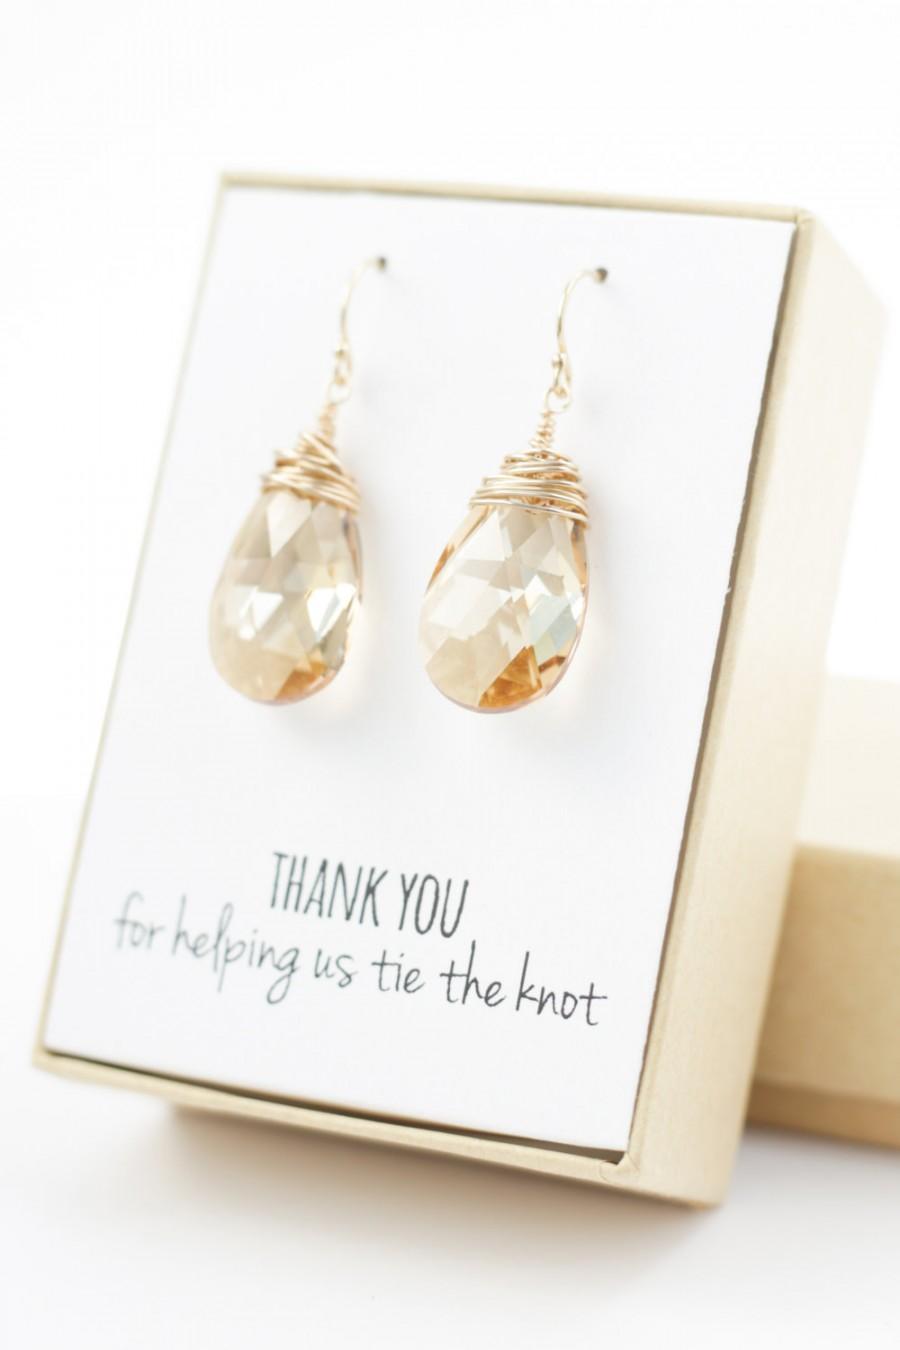 Wedding - Champagne Gold Swarovski Crystal Earrings - Large Crystal Earrings - Champagne Swarovski Earrings - Wire-Wrapped - Bridesmaid Earrings Gift